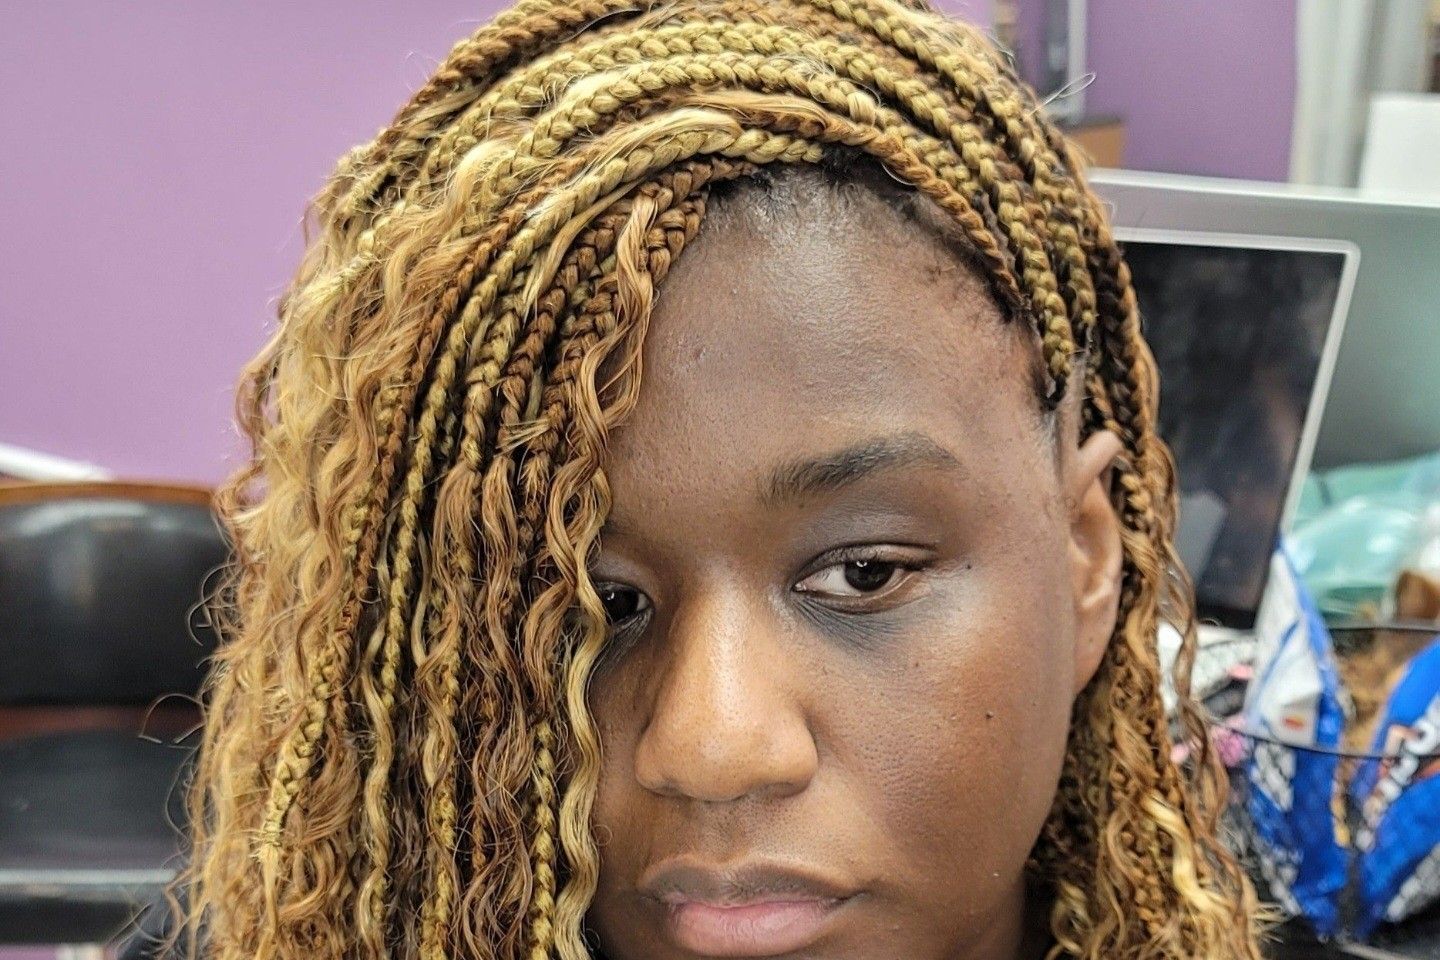 Gypsy Braids We are going sew in but make it braids. If you